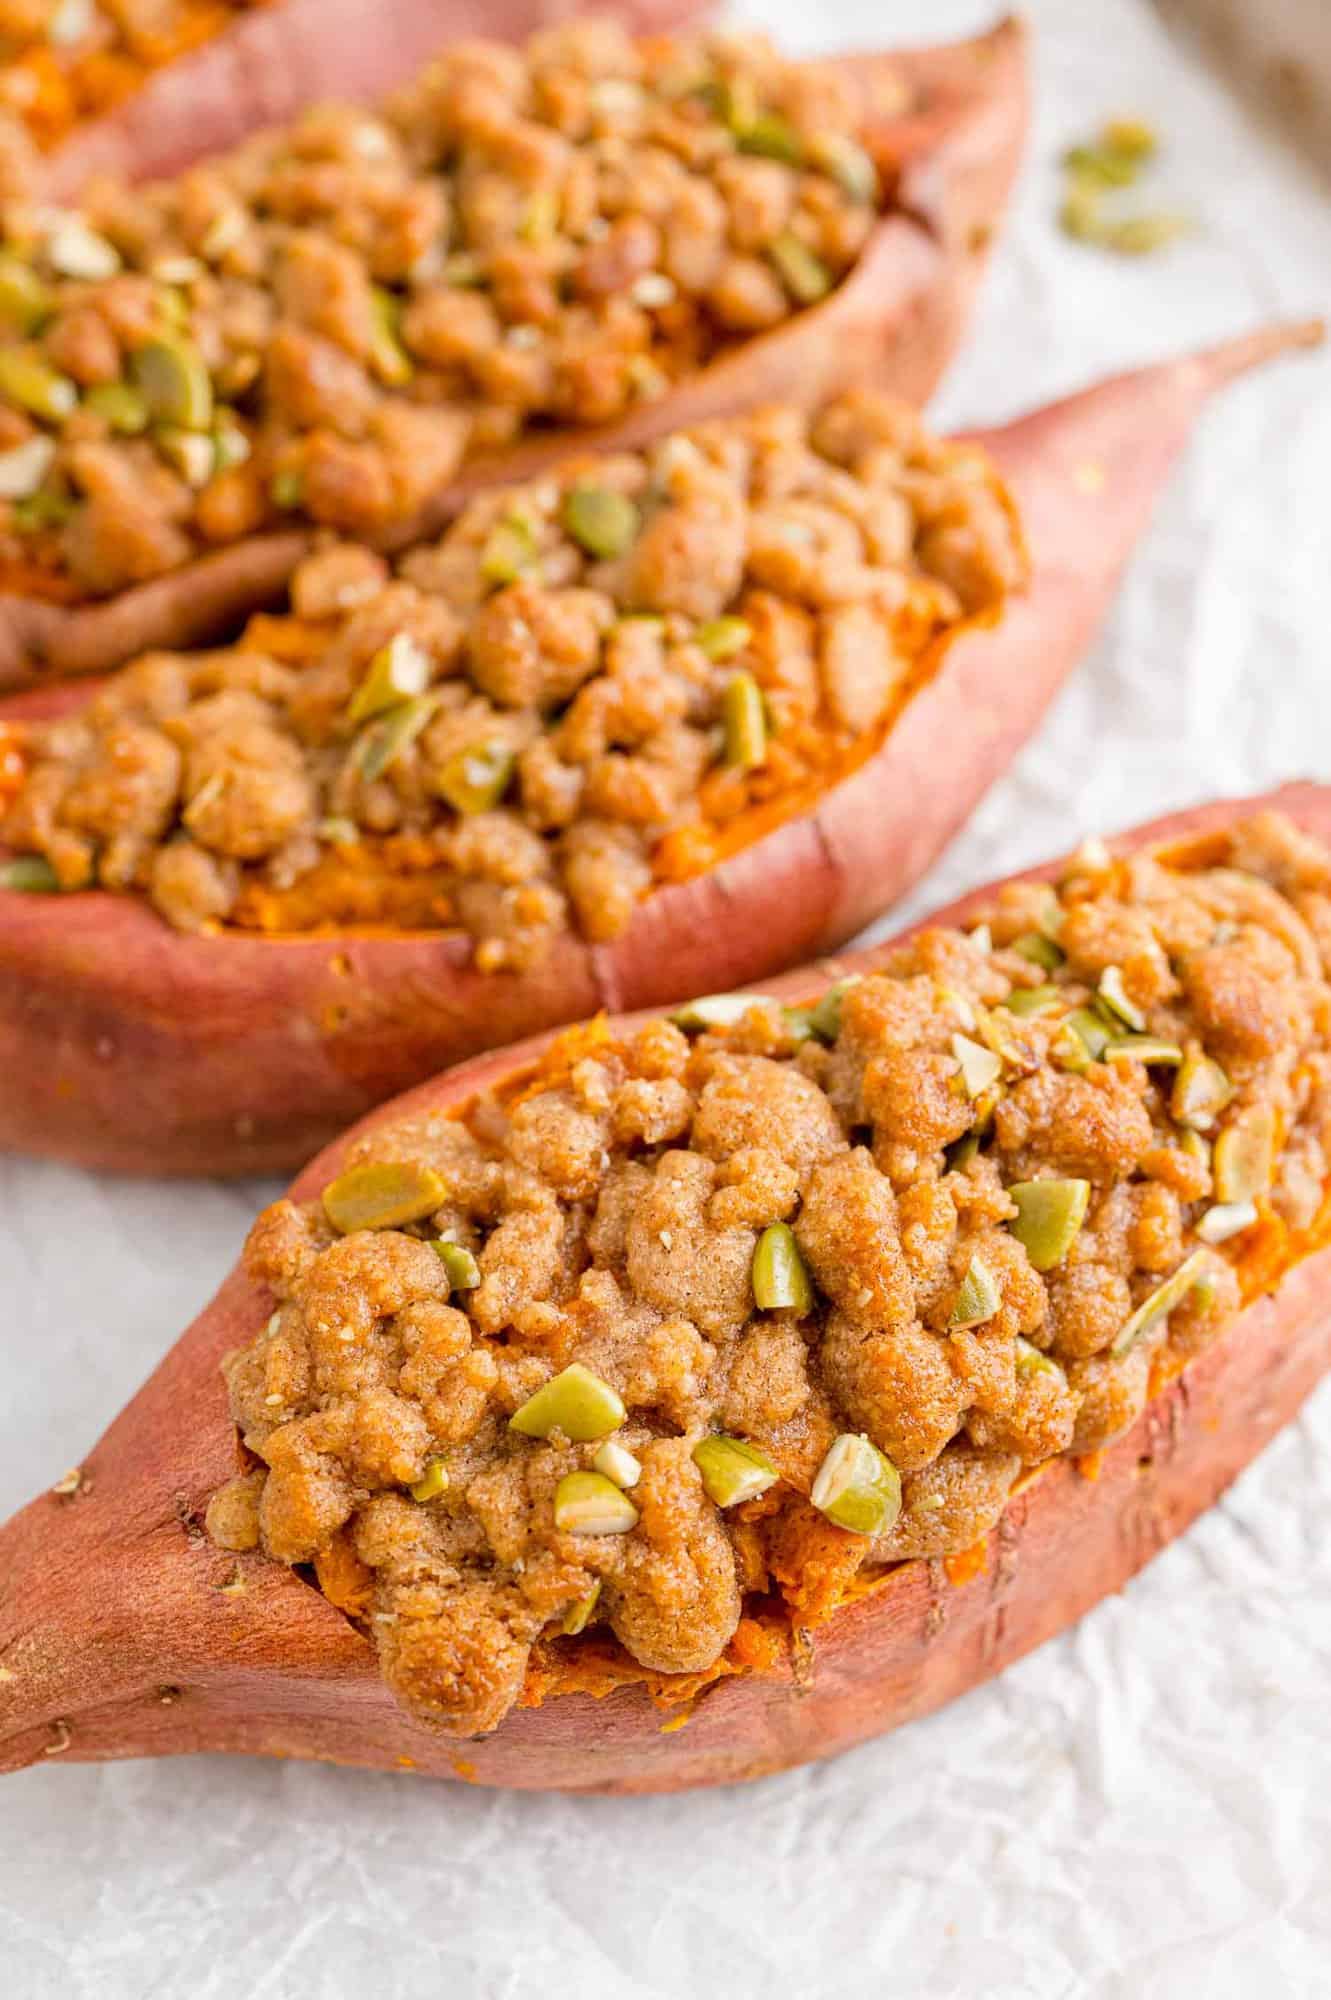 Twice baked sweet potatoes with a streusel topping.